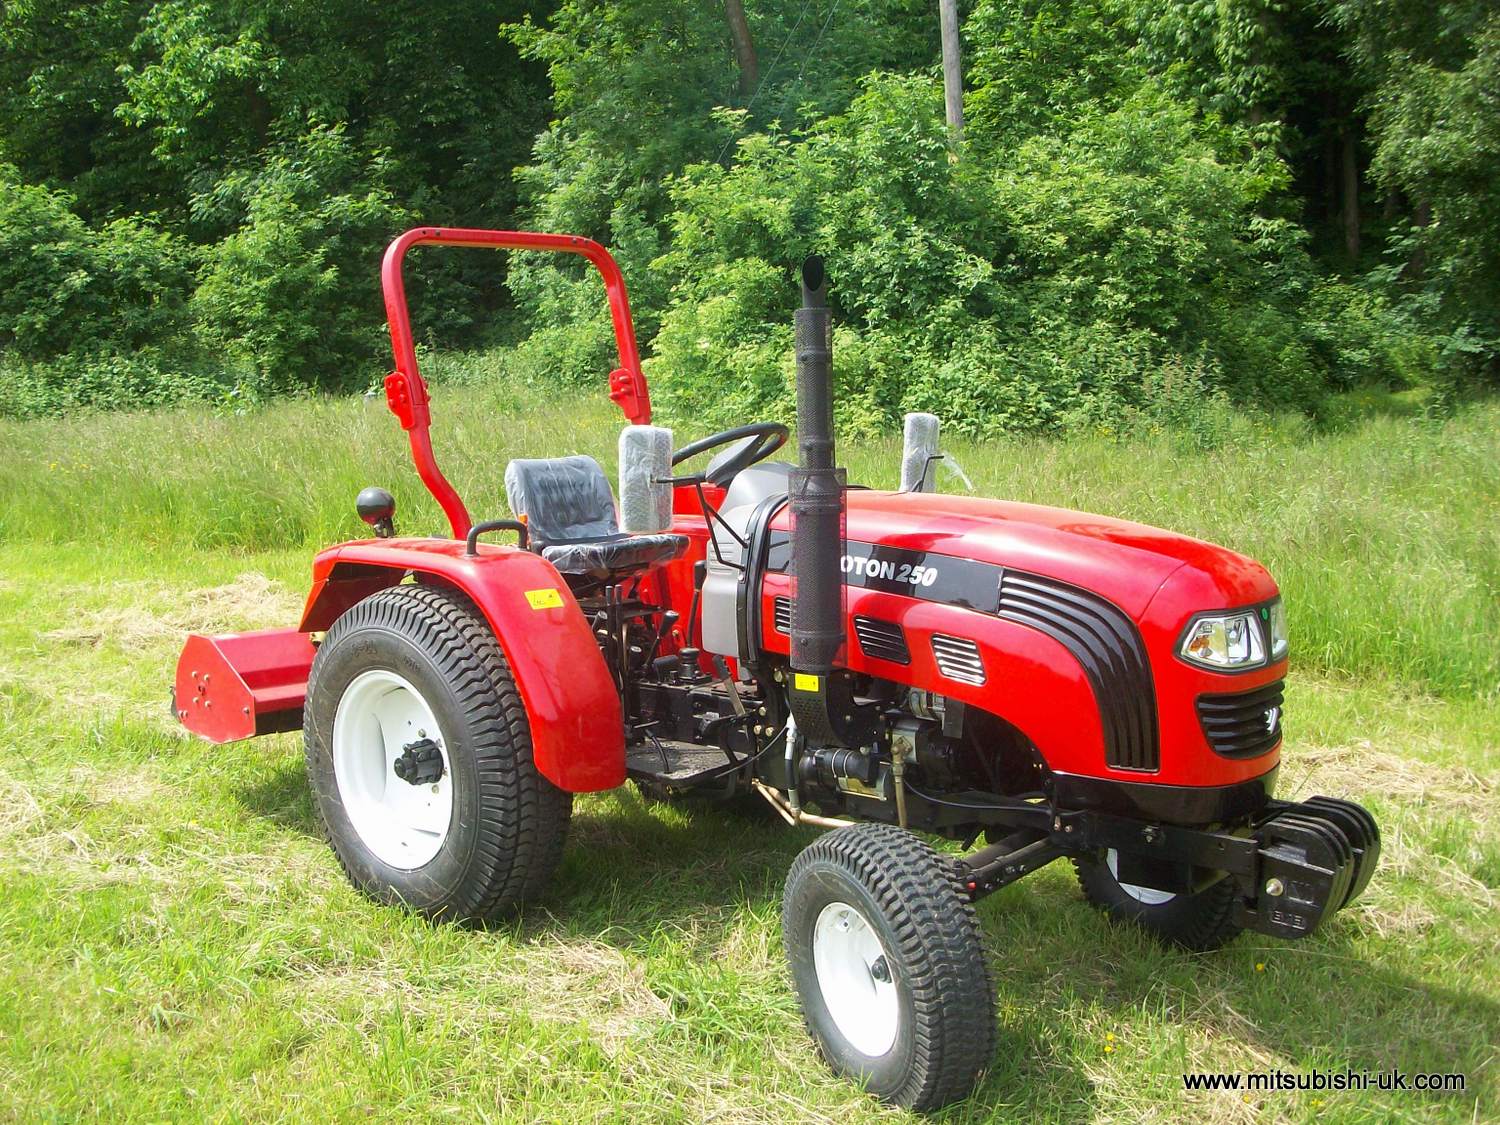 FOTON 250 Compact Tractor New Flail Mower Complete Package 25 Hp ...